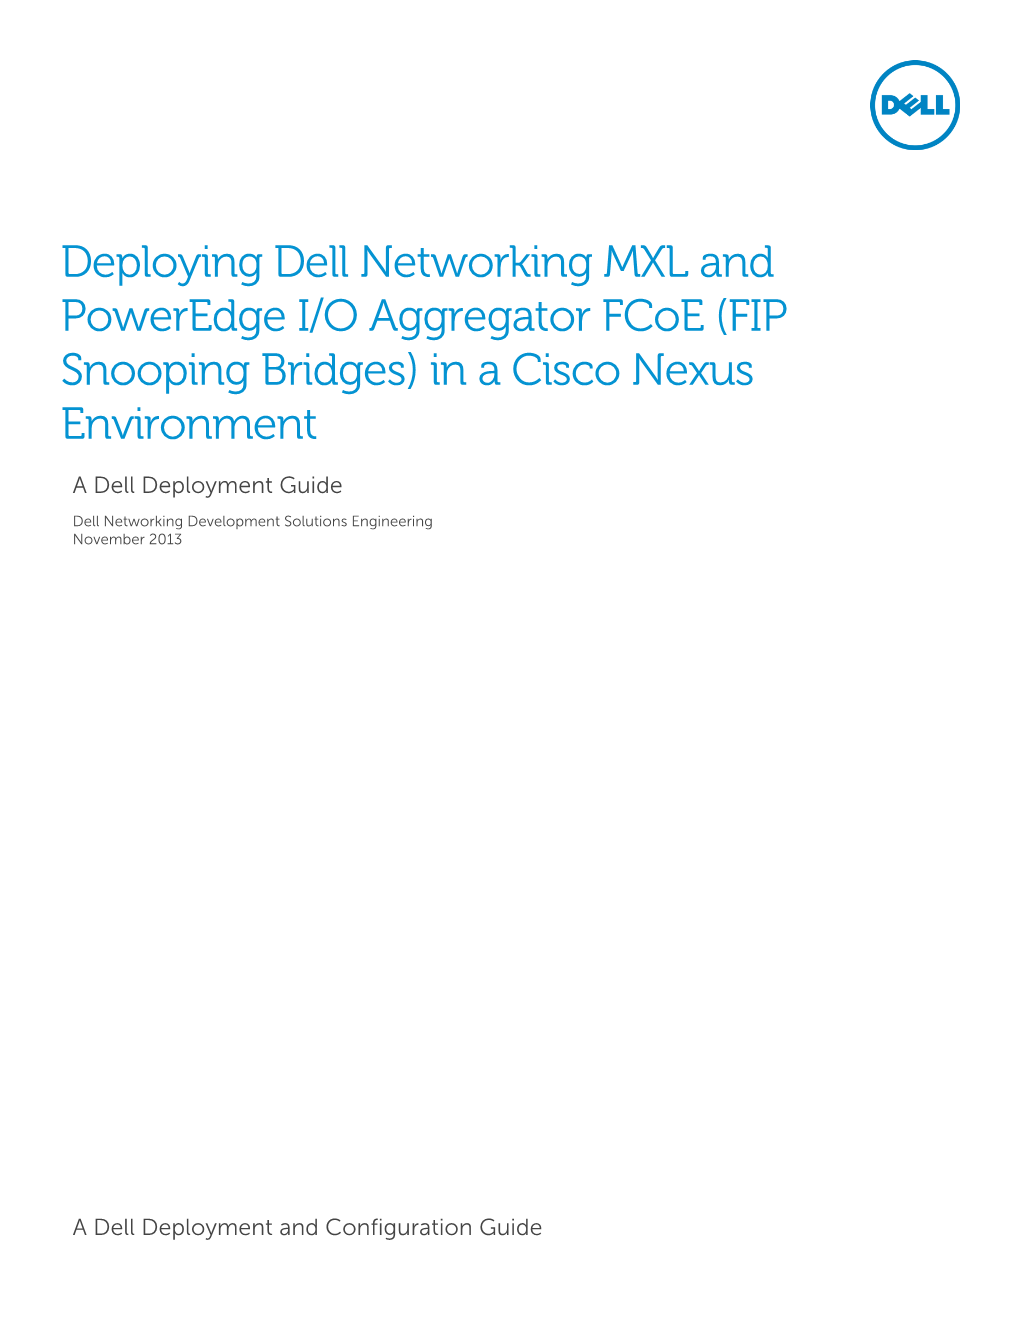 Deploying Dell Networking MXL and Poweredge I/O Aggregator Fcoe (FIP Snooping Bridges) in a Cisco Nexus Environment